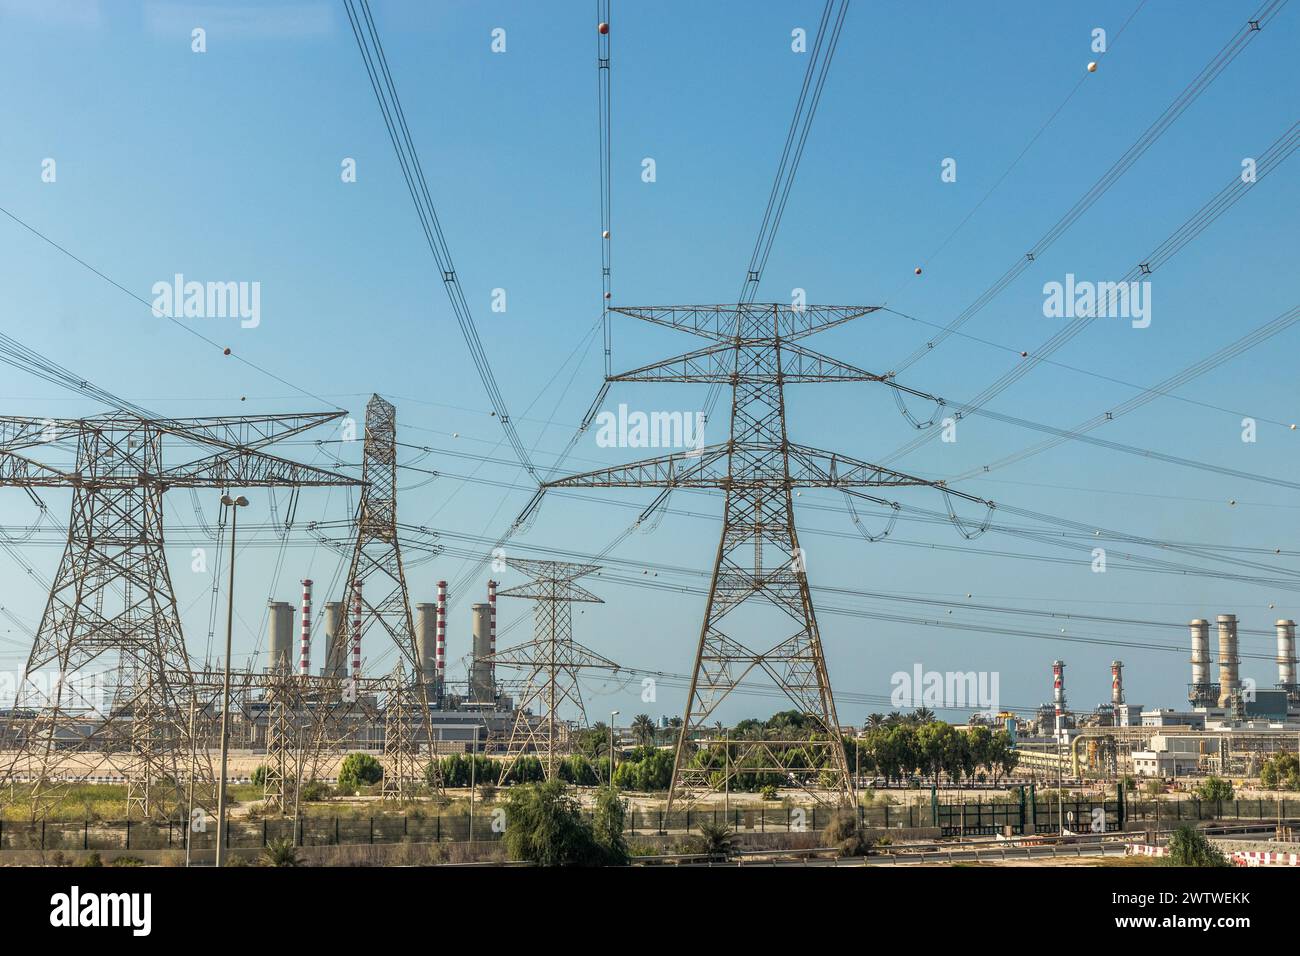 View of a power plant in Dubai, United Arab Emirates. Stock Photo